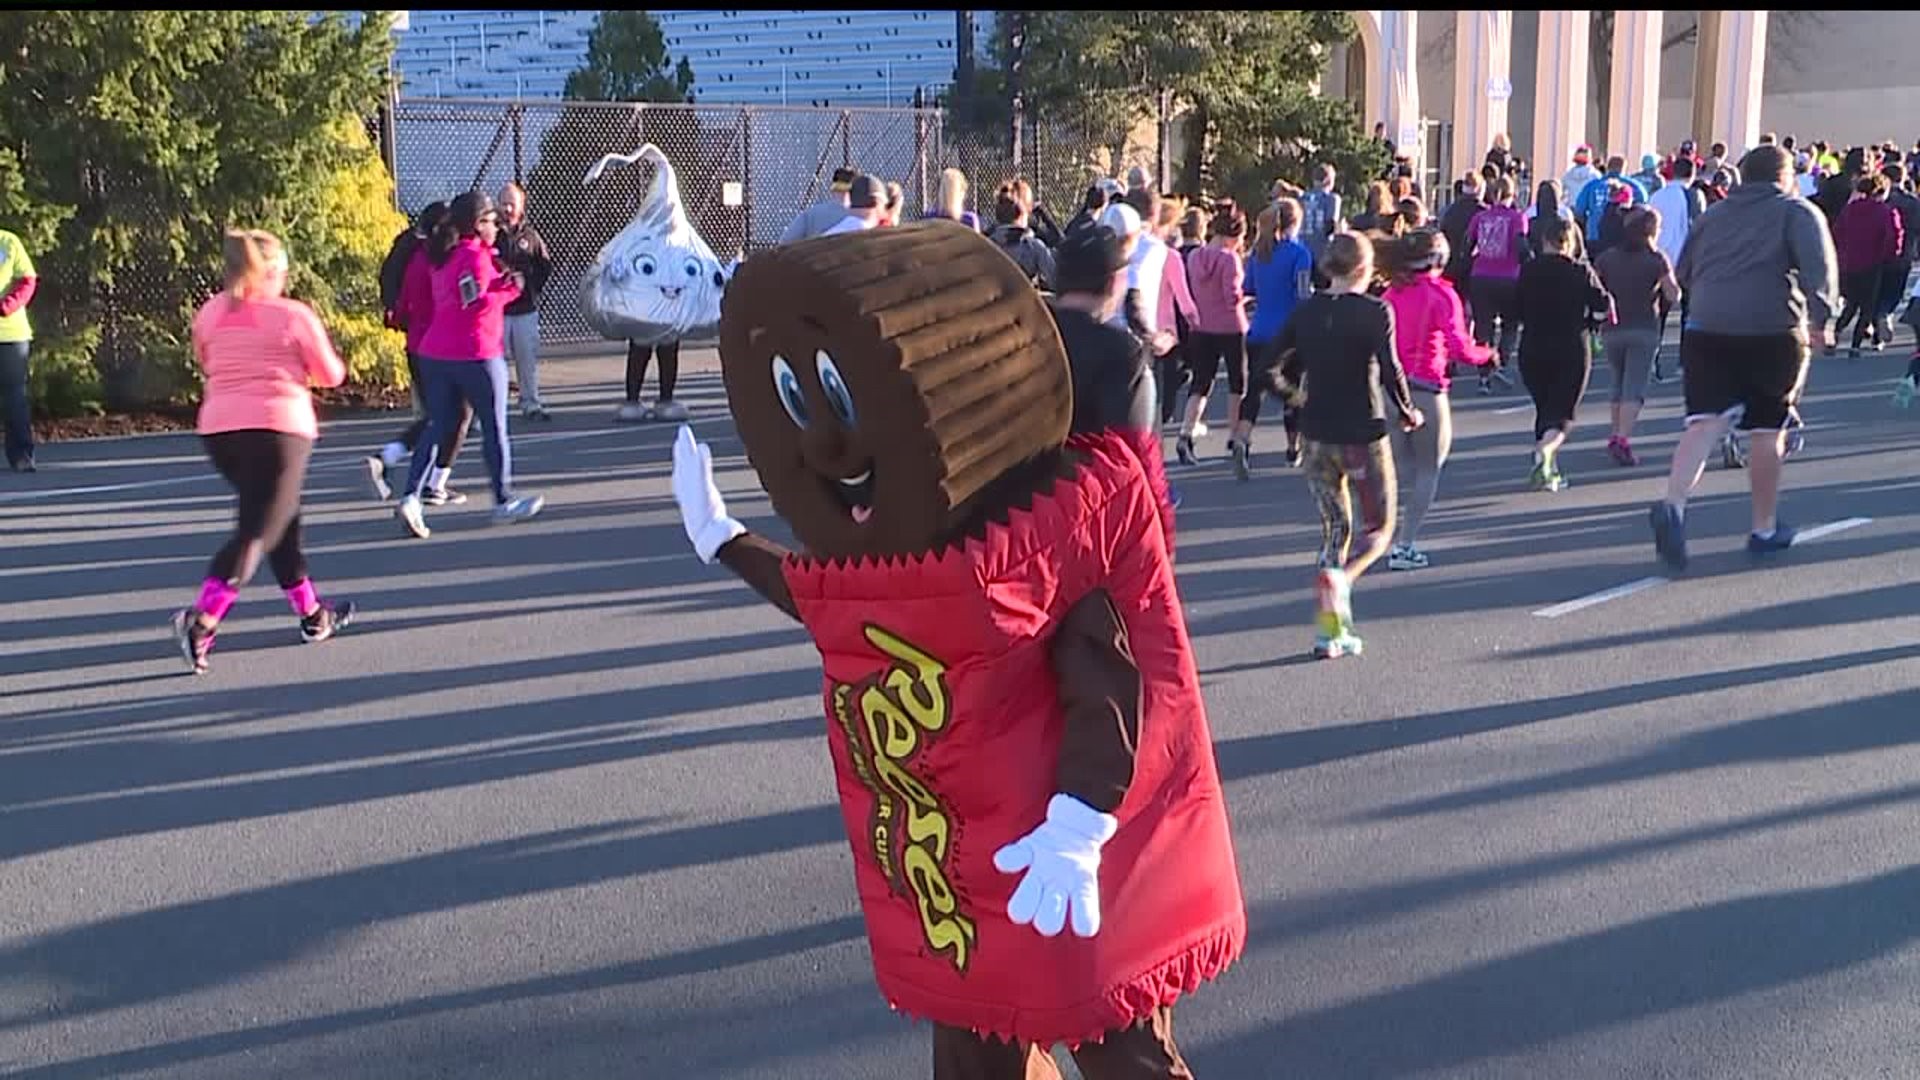 Runners weave their way through "Sweetest Place on Earth" at Hershey 10K